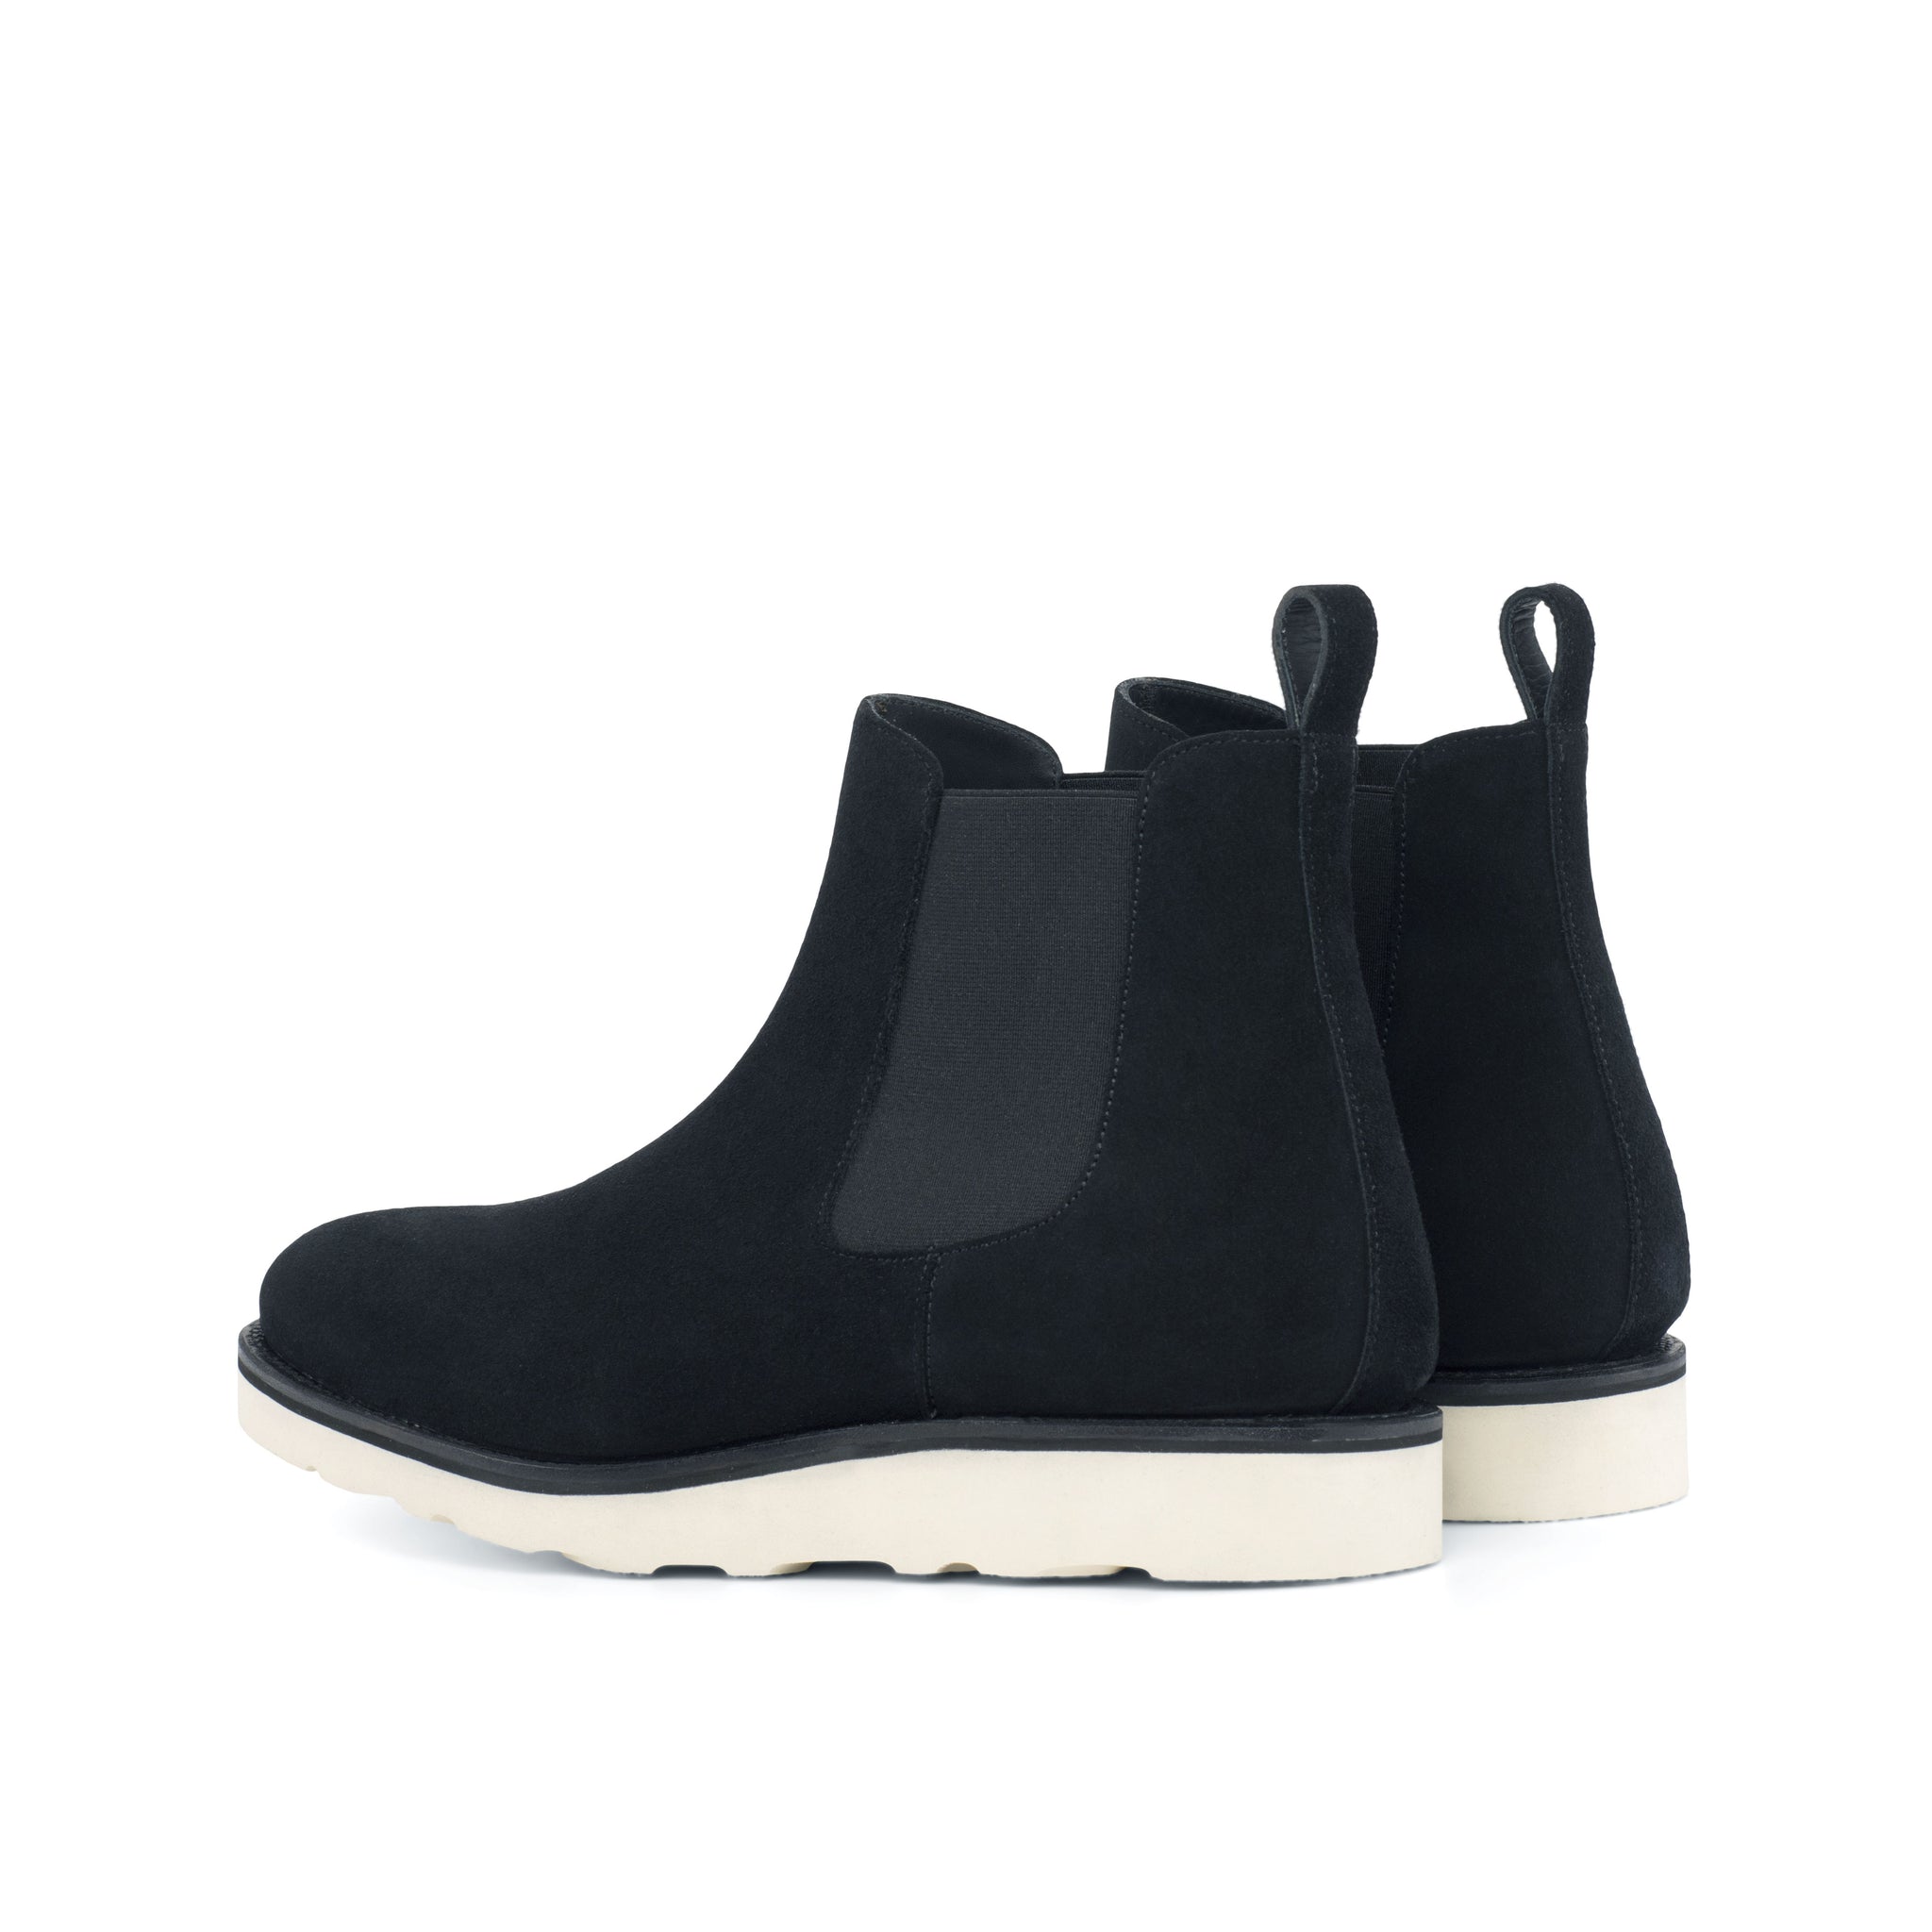 Unique Handcrafted Black Lux Suedee Chelsea Boots w/ Sportwedge Sole